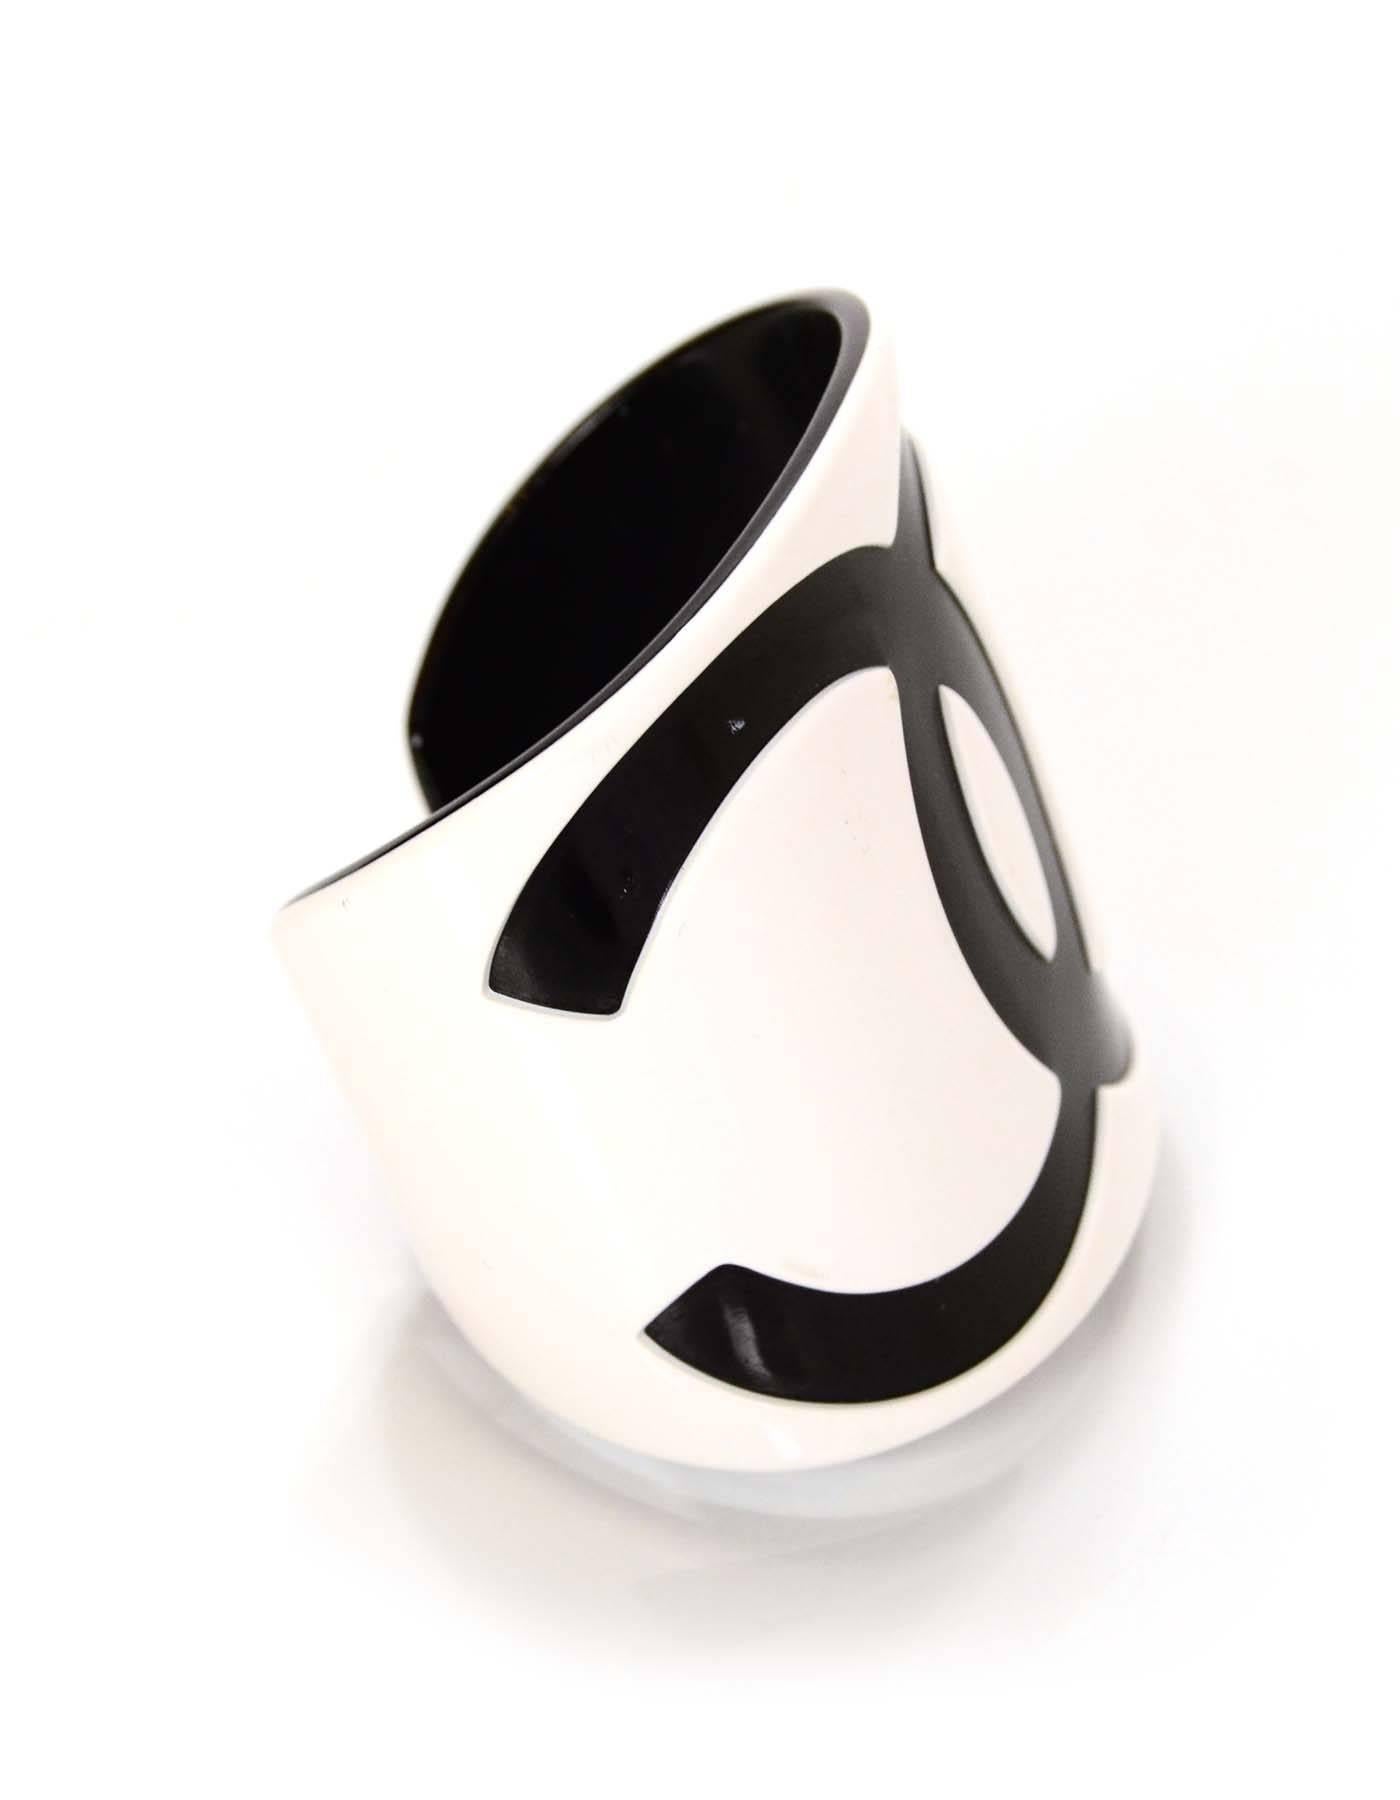 Chanel Black and White Resin CC Cuff

Made In: France
Year of Production: 2001
Color: Black and white
Materials: Resin
Closure: Slide on
Stamp: CHANEL 01 CC P MADE IN FRANCE
Overall Condition: Excellent pre-owned condition with the exception